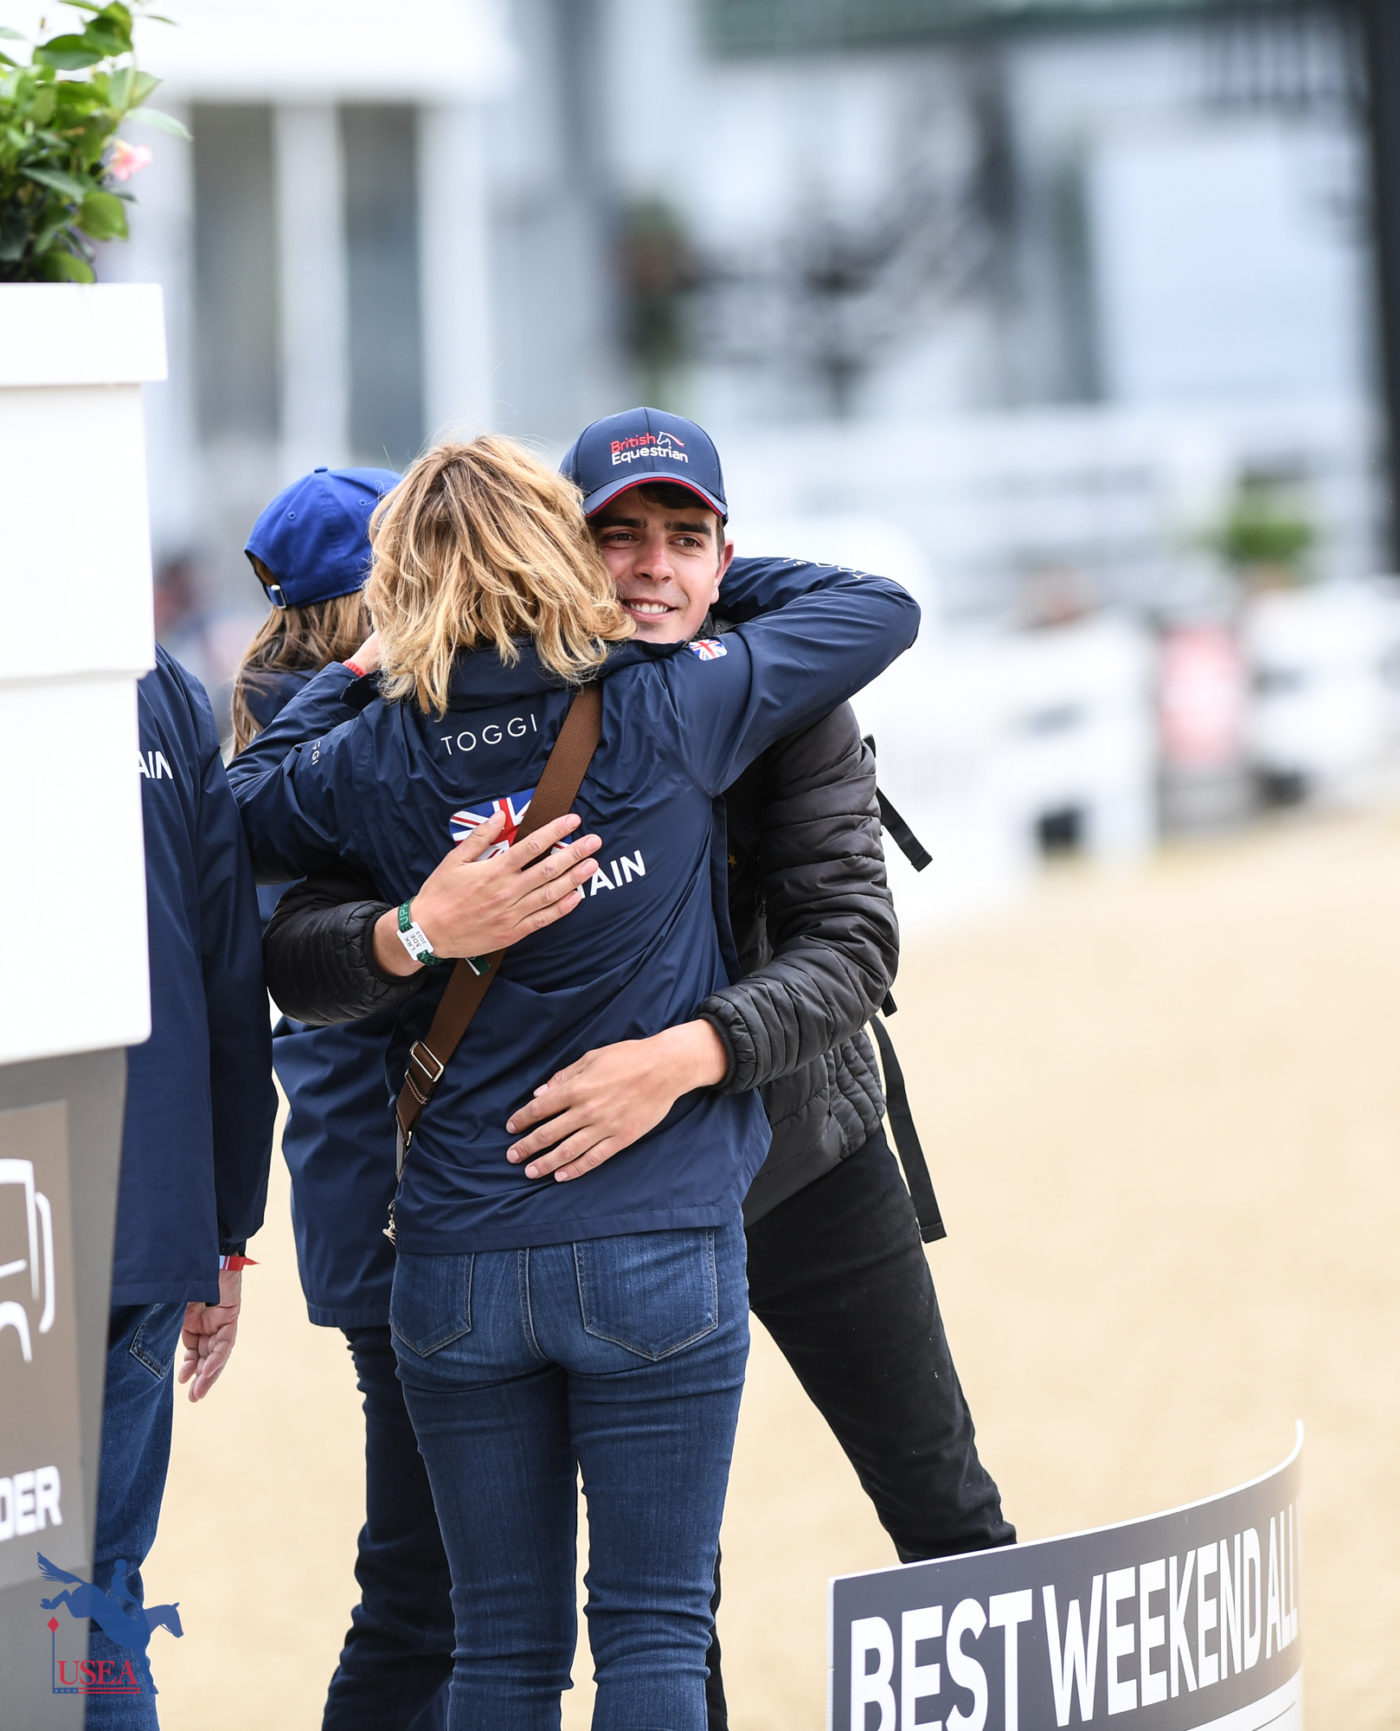 Tom McEwen's support crew celebrated after his leading ride. USEA/Lindsay Berreth photo